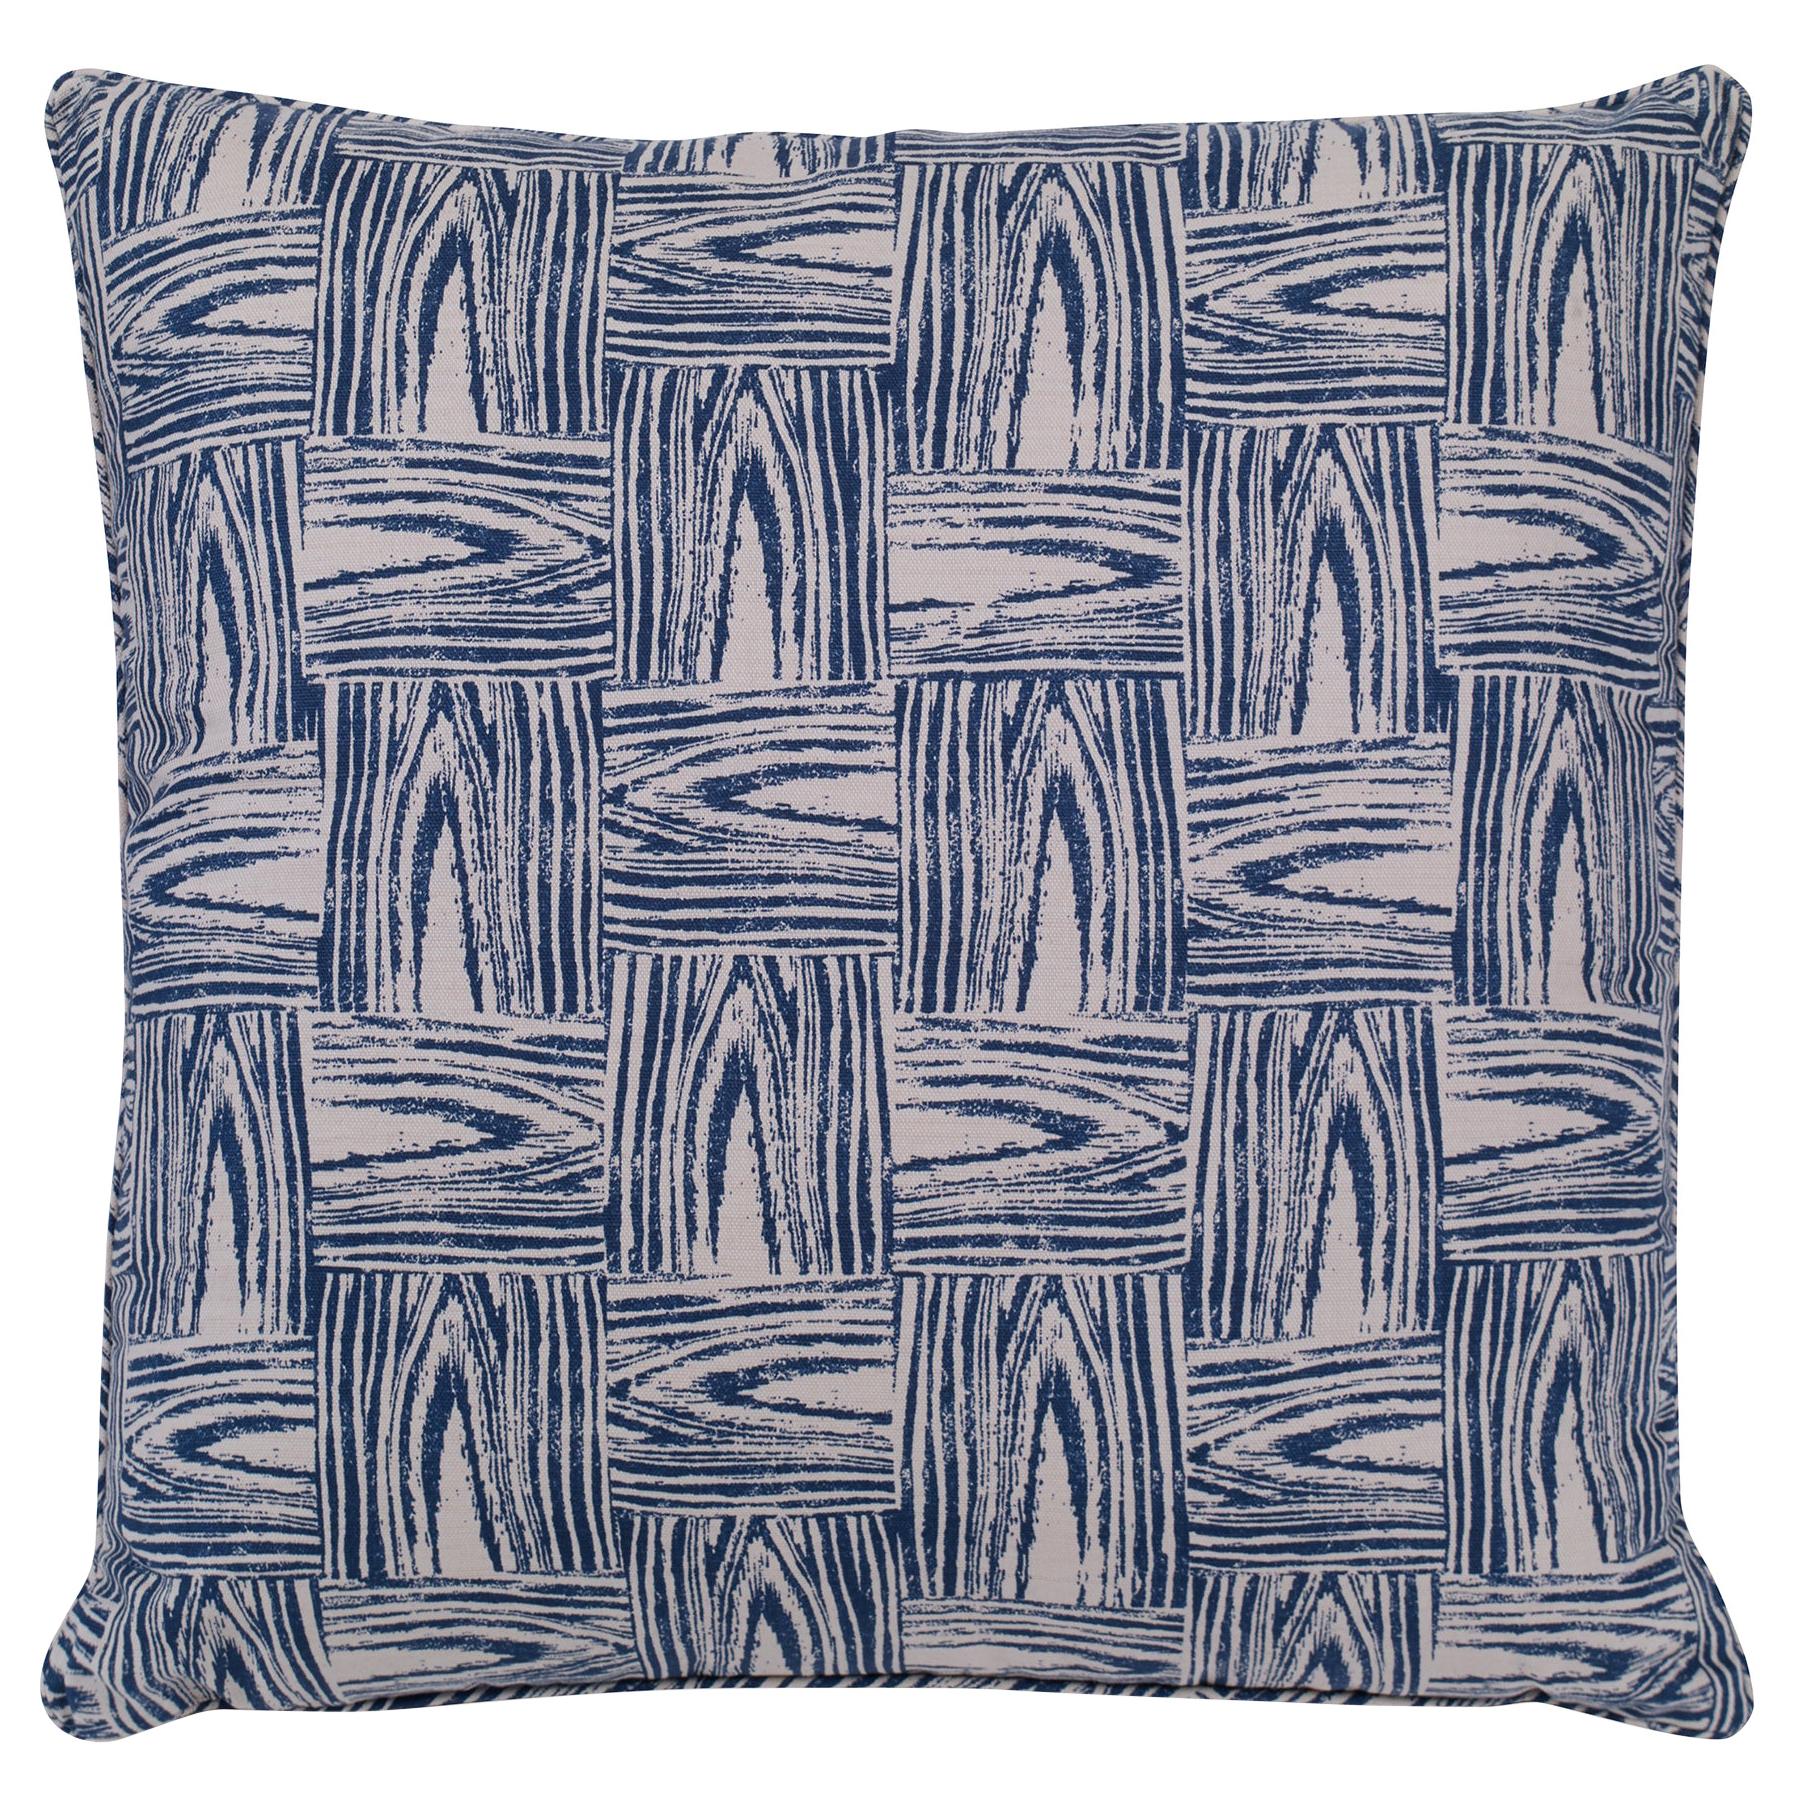 Timberline Decorative Accent Pillow by CuratedKravet